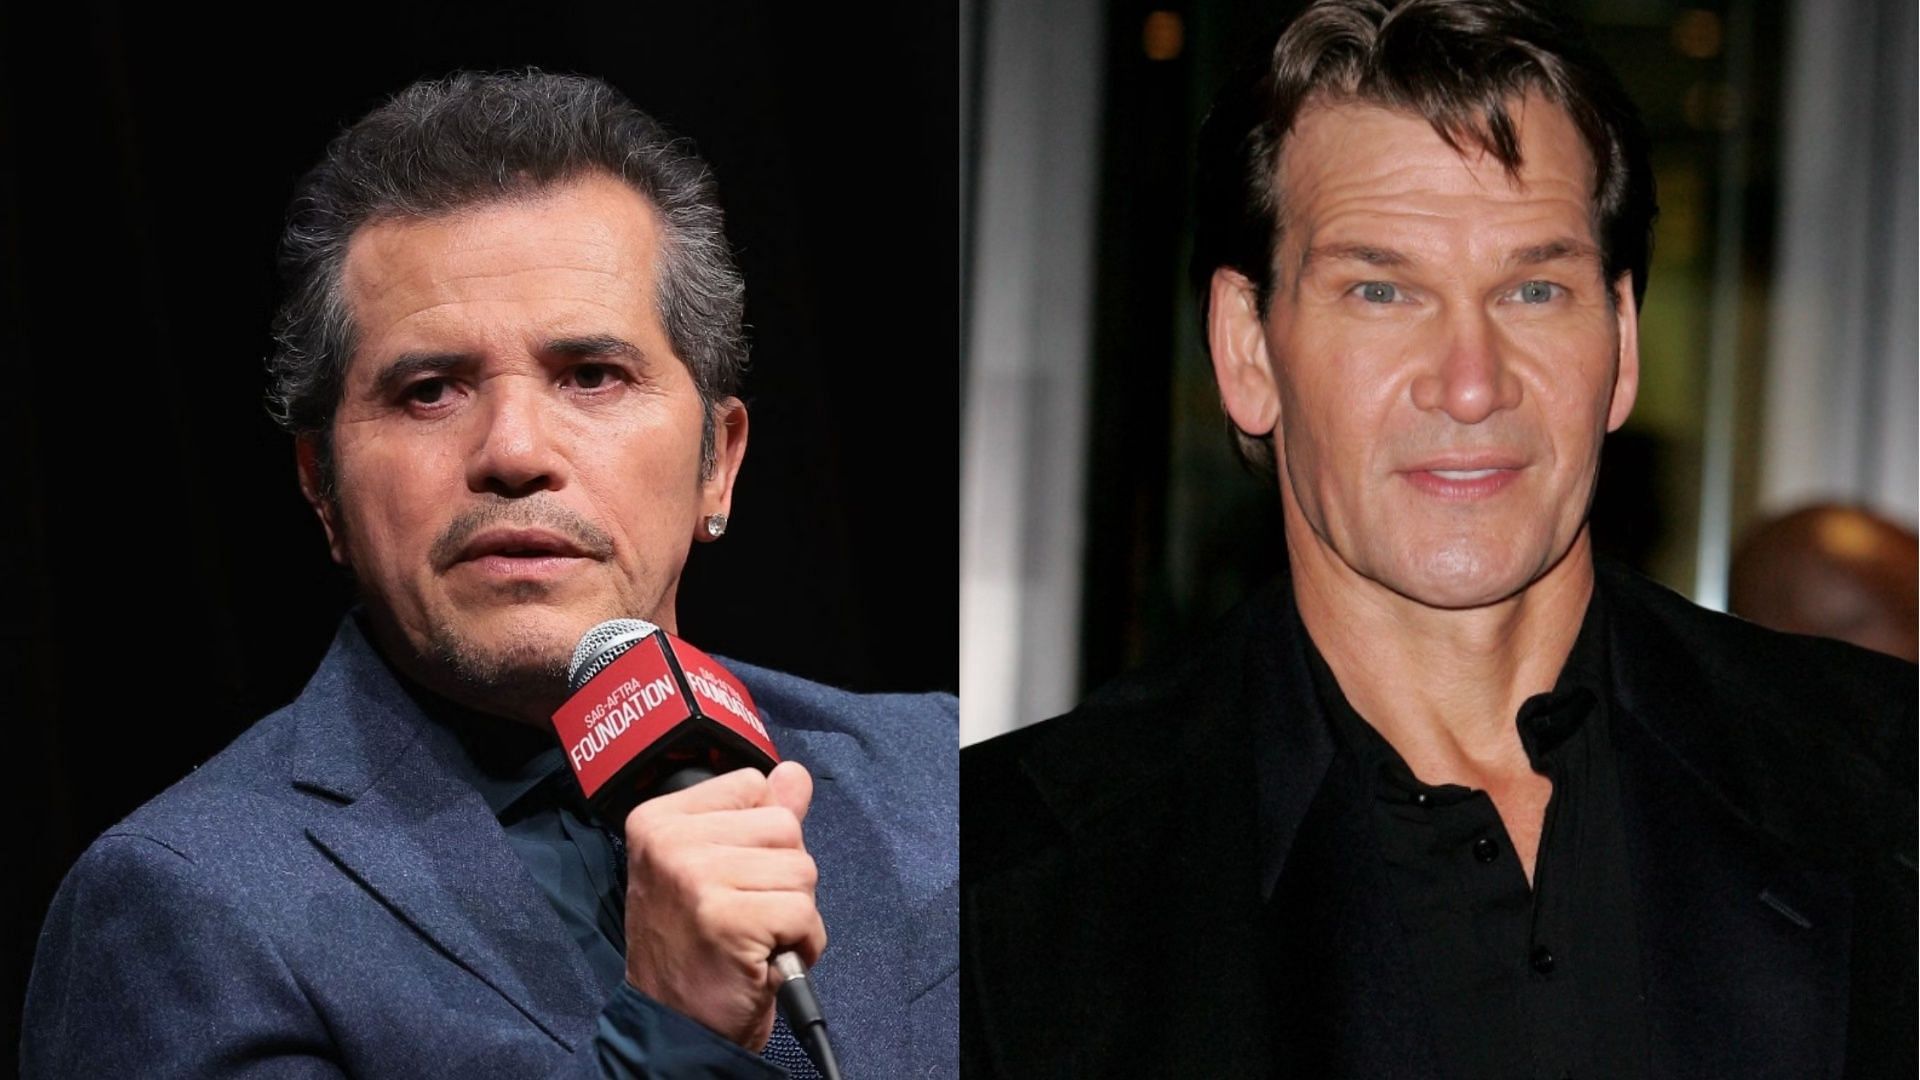 John Leguizamo and Patrick Swayze worked together in 